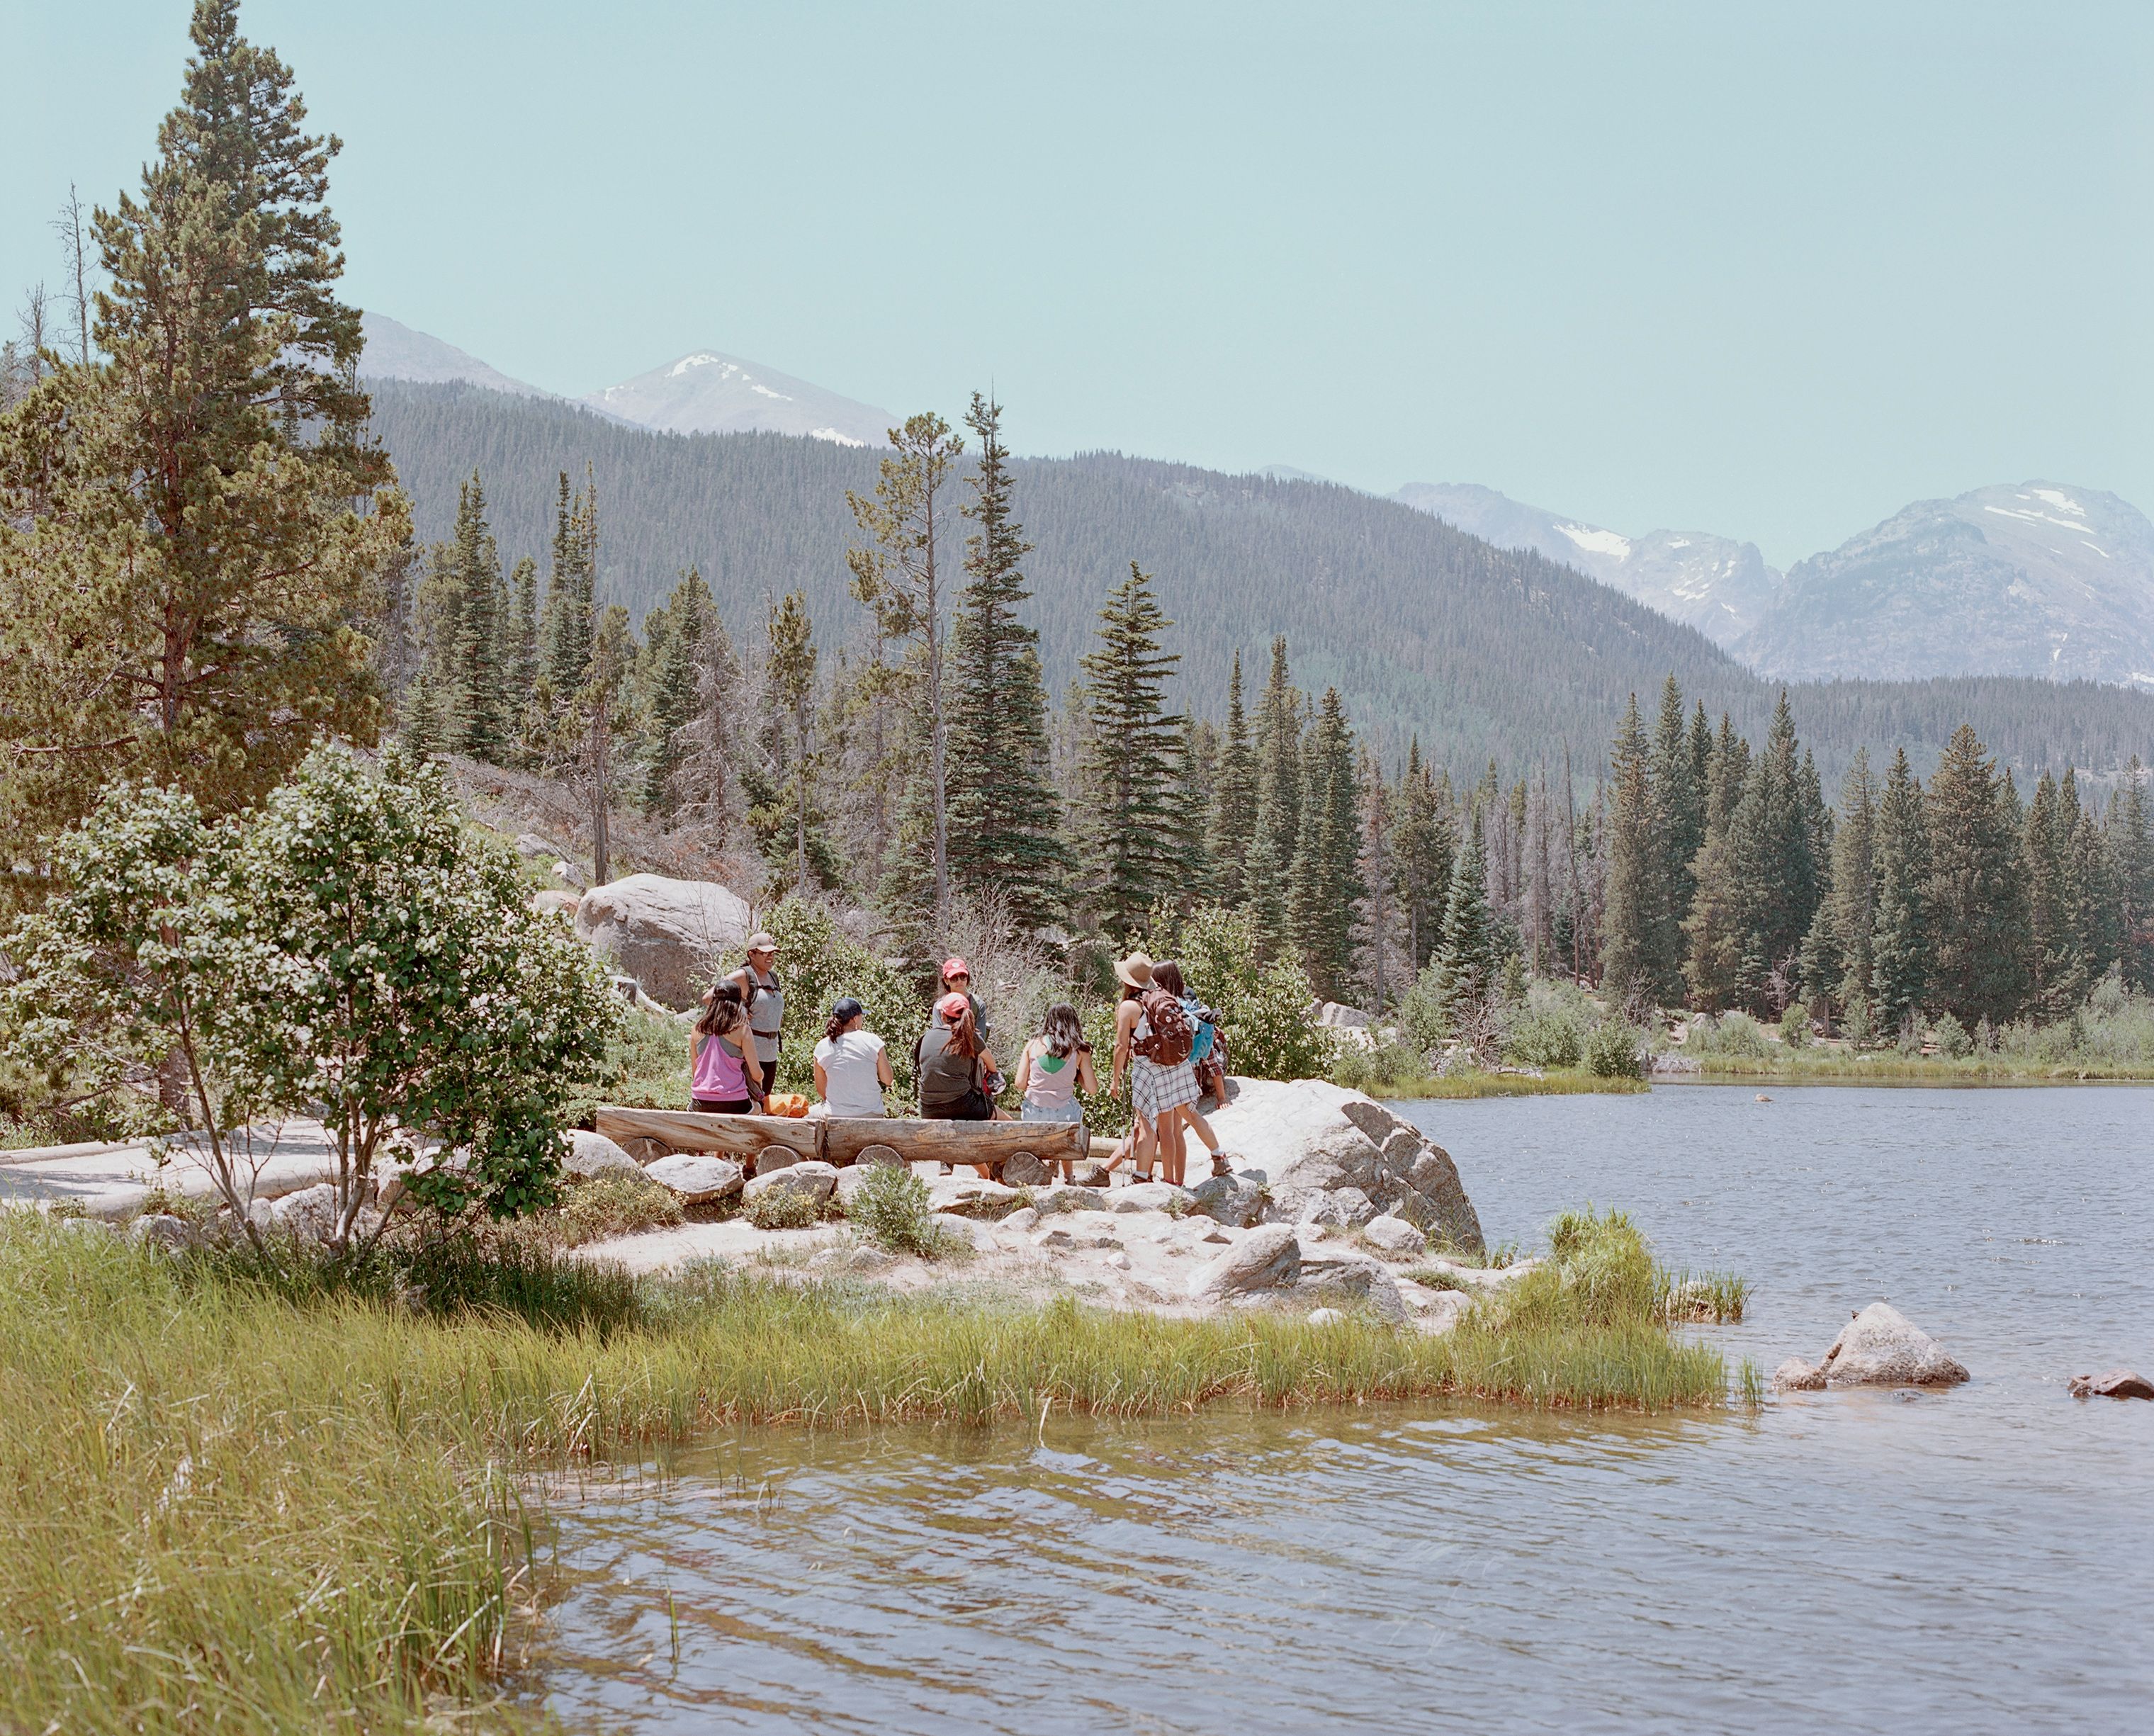 Leaders of Latino Outdoors Colorado practice first aid safety at Sprague Lake in Rocky Mountain National Park, June 29, 2018. (Catherine Hyland for TIME)